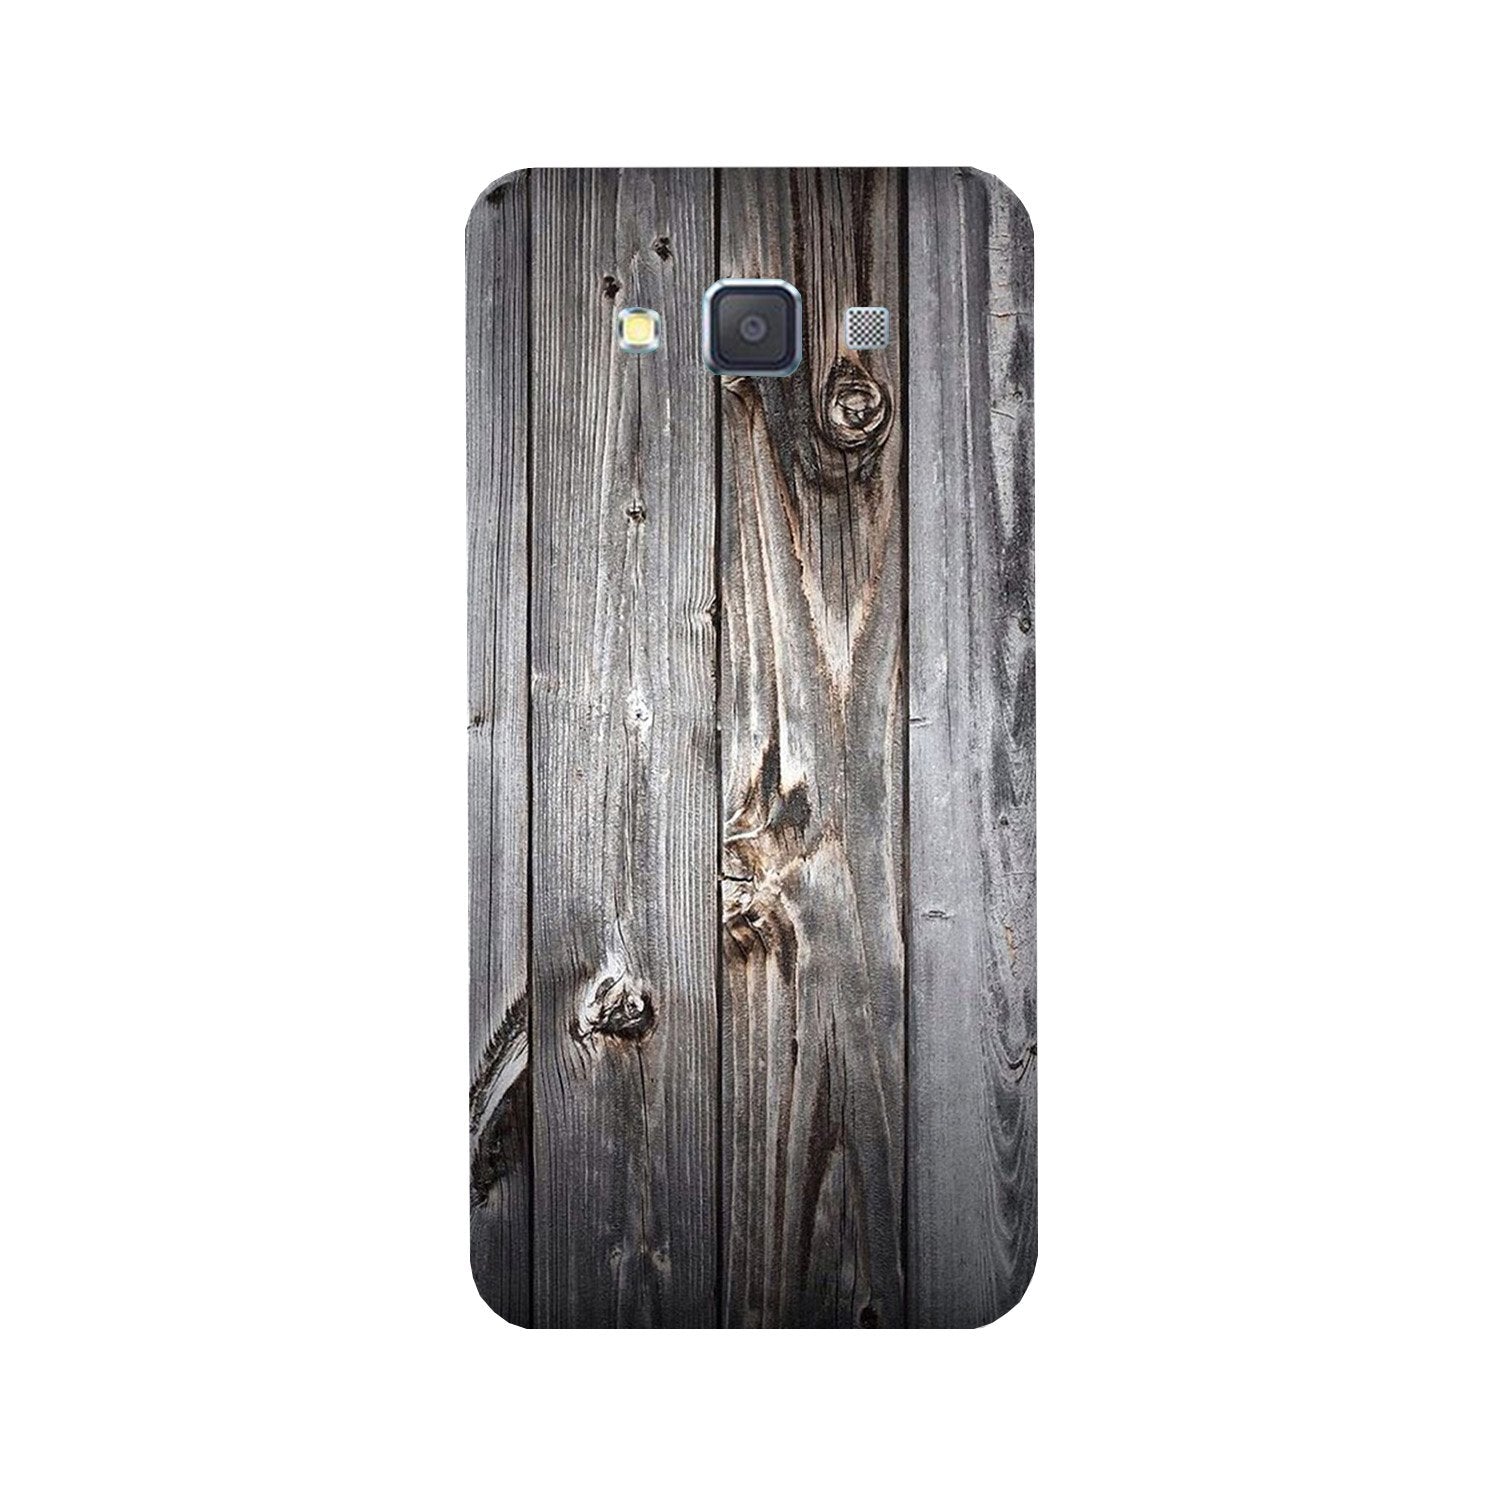 Wooden Look Case for Galaxy Grand Max(Design - 114)